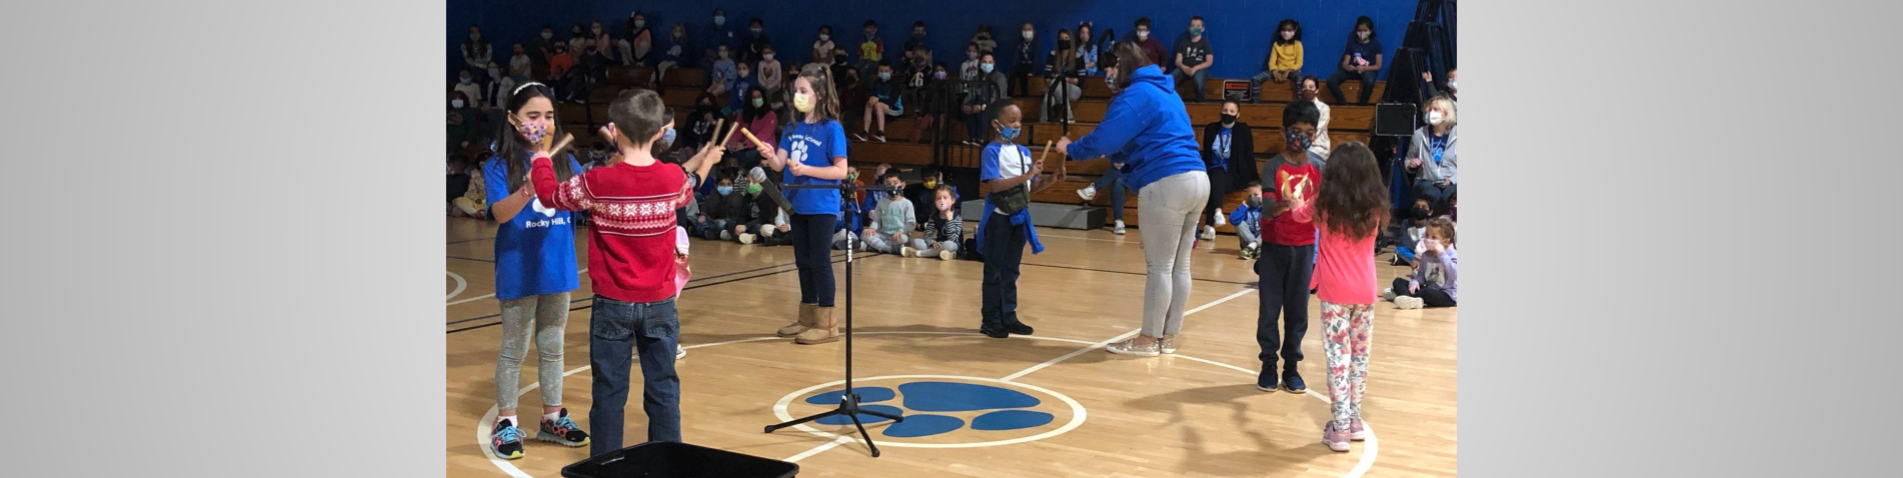 Students play musical instruments in a performance